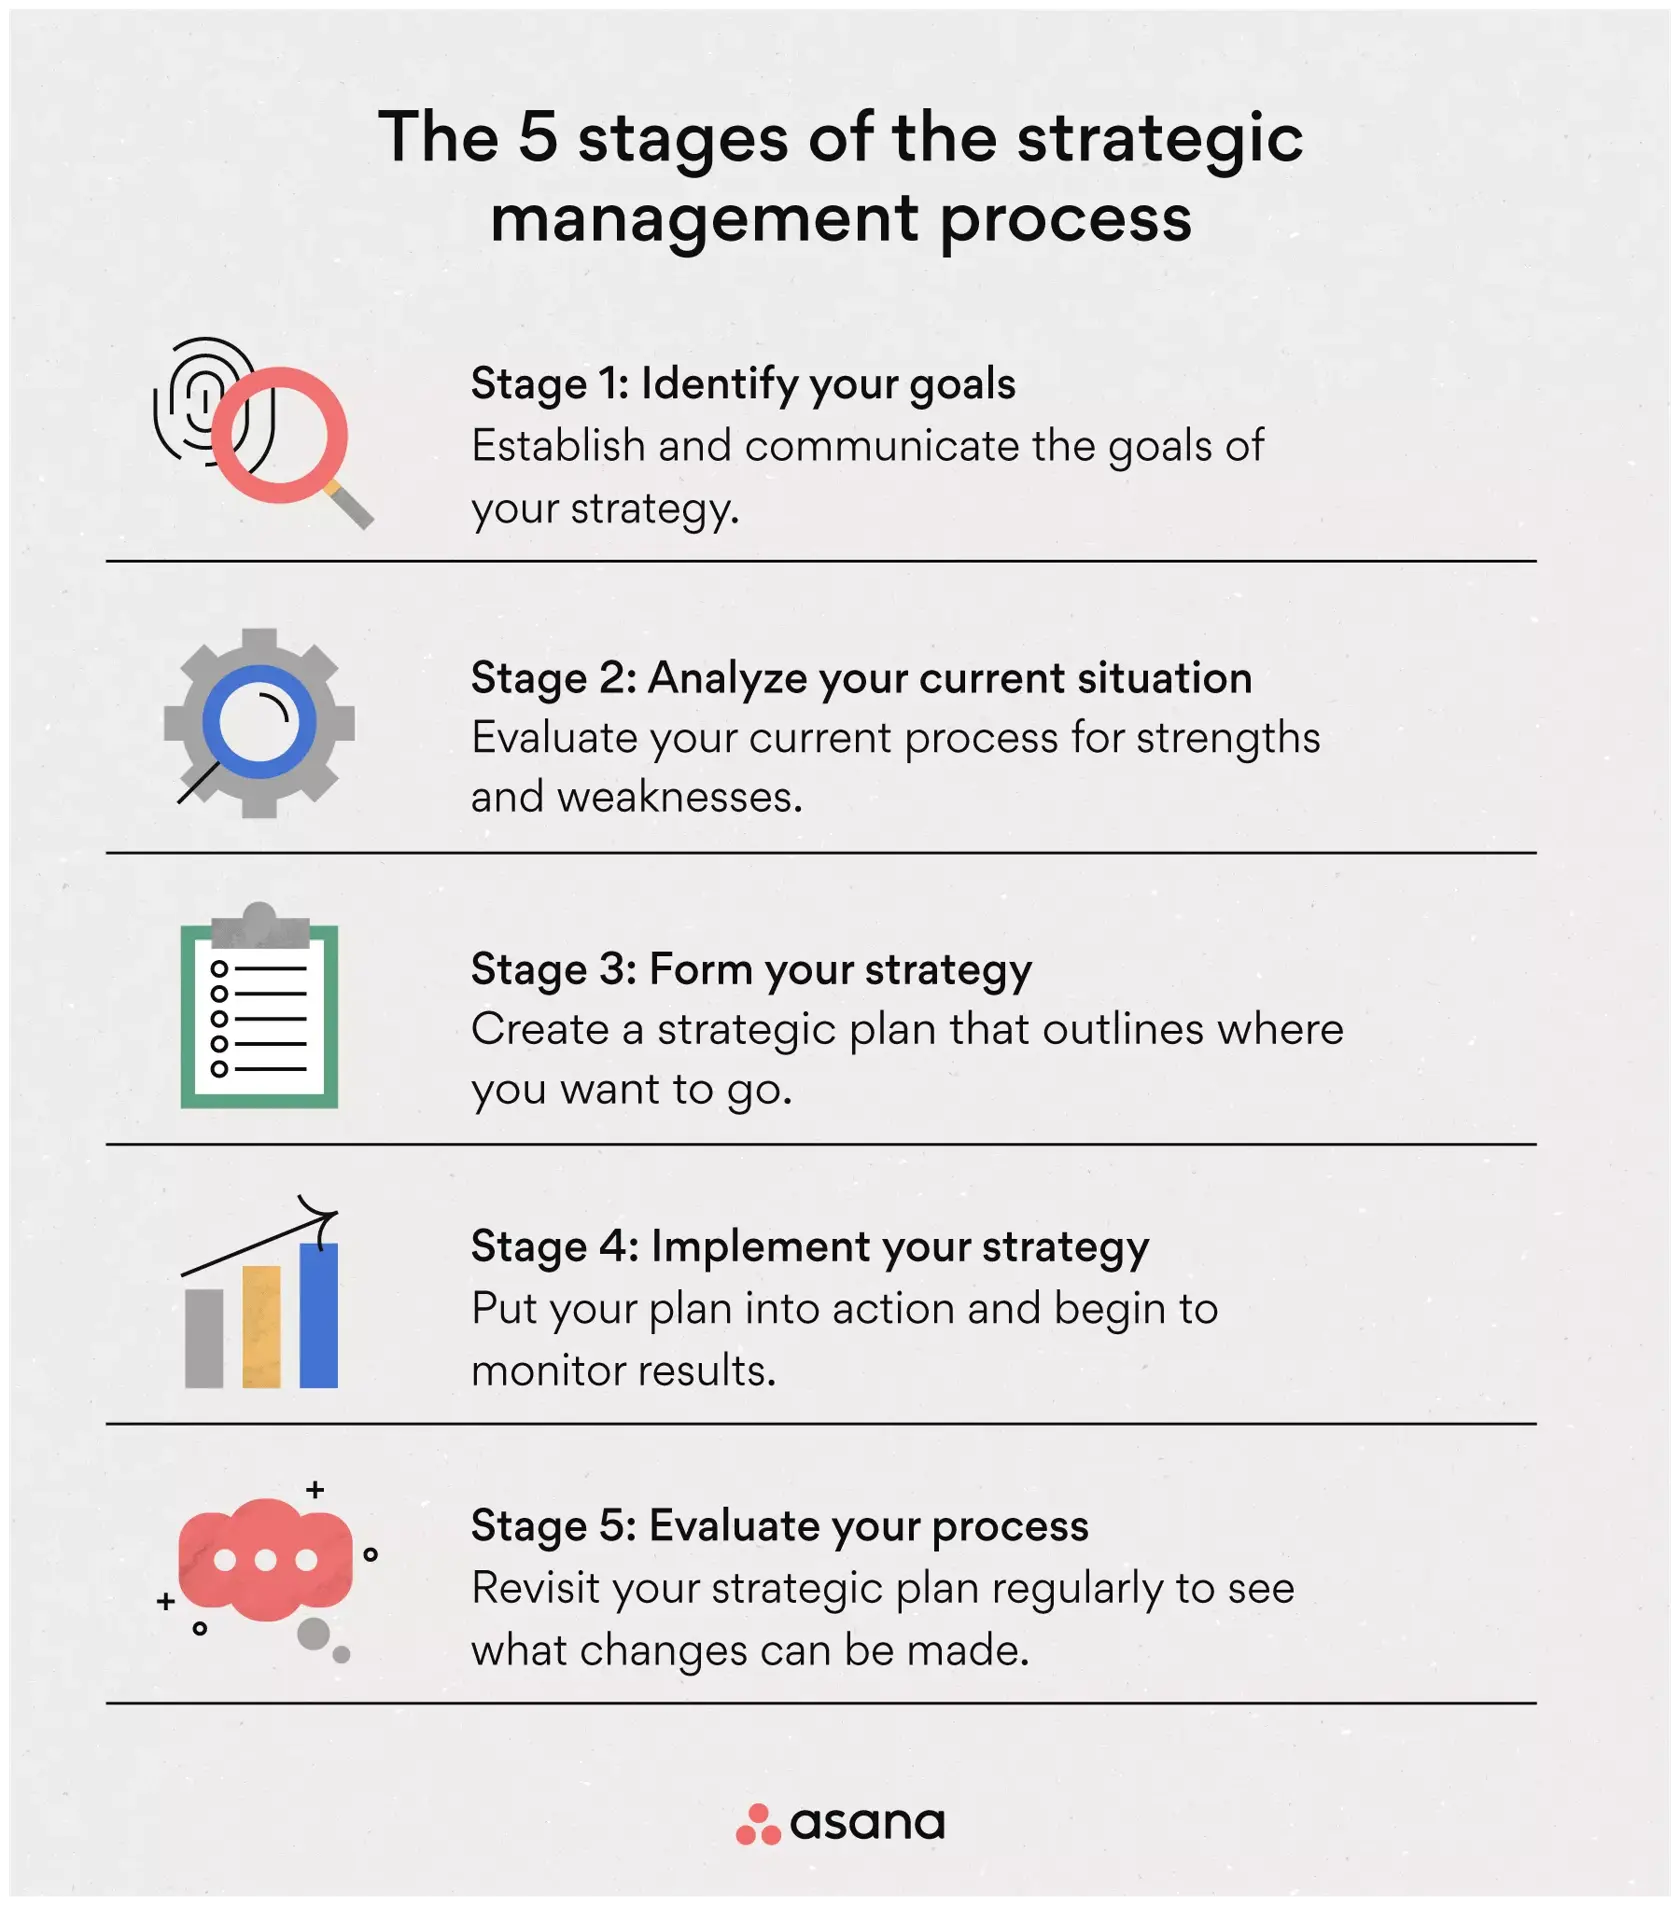 [inline illustration] The 5 stages of the strategic management process (infographic)